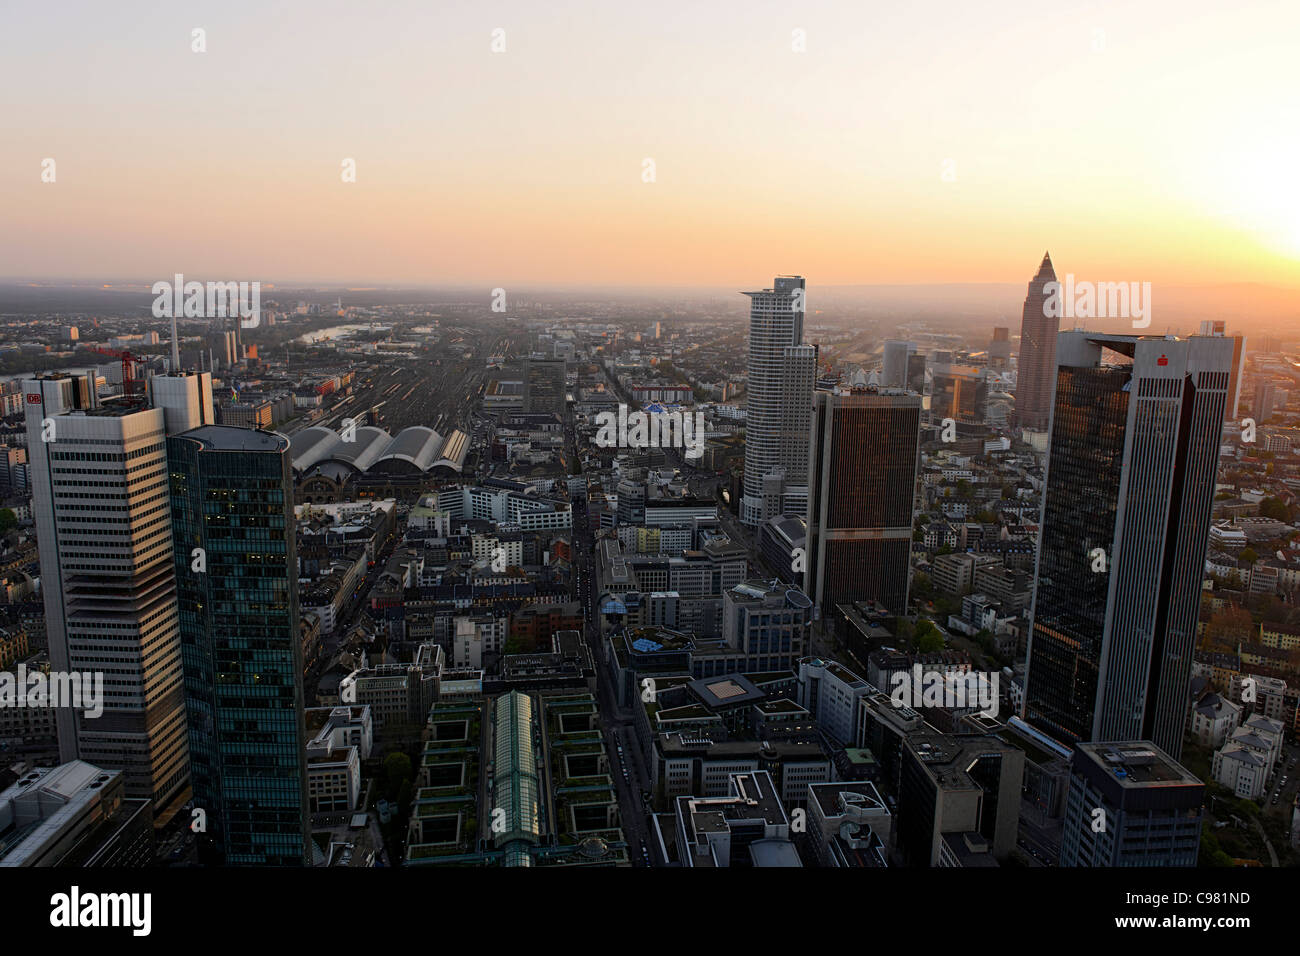 Panoramic view of the financial district skyline at sunset, Frankfurt am Main, Hesse, Germany, Europe Stock Photo